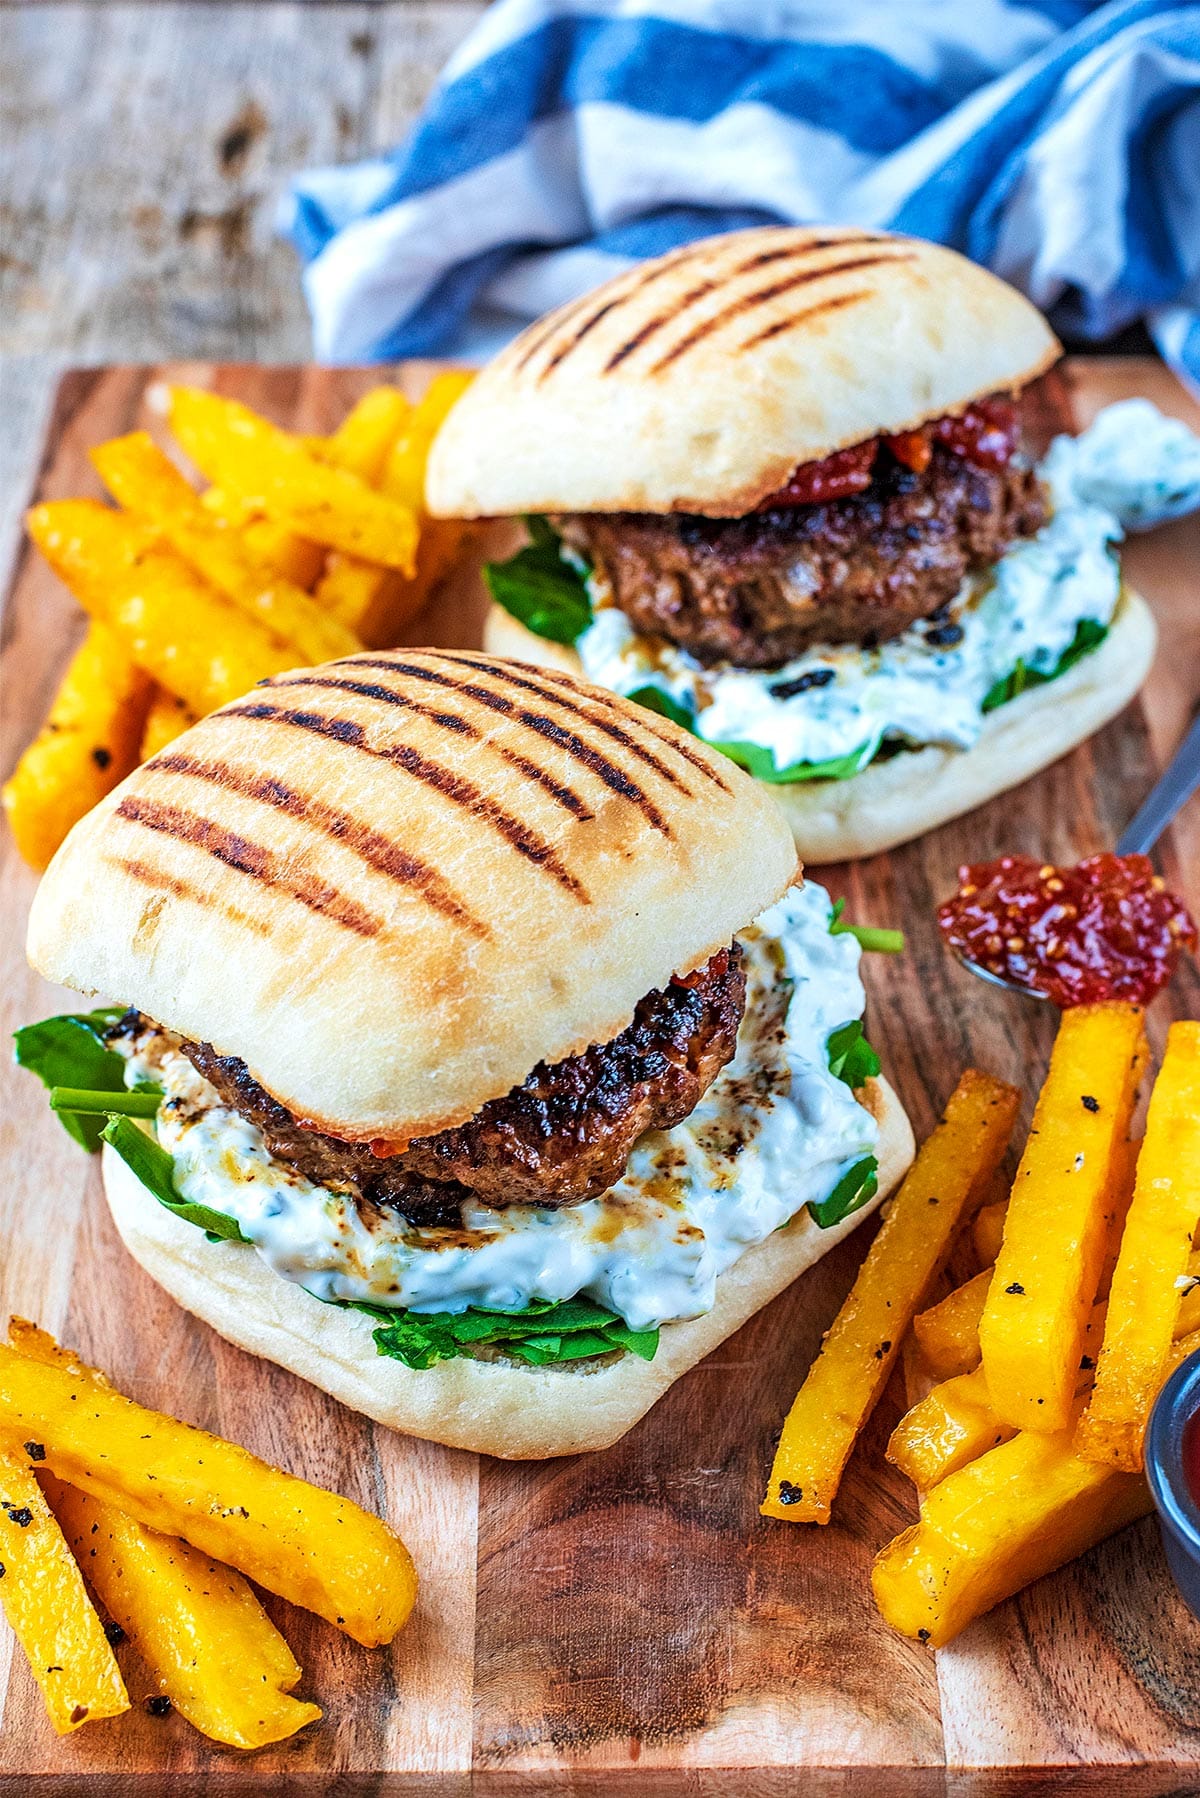 Two Spiced Lamb Burgers on a wooden board with fries and dip